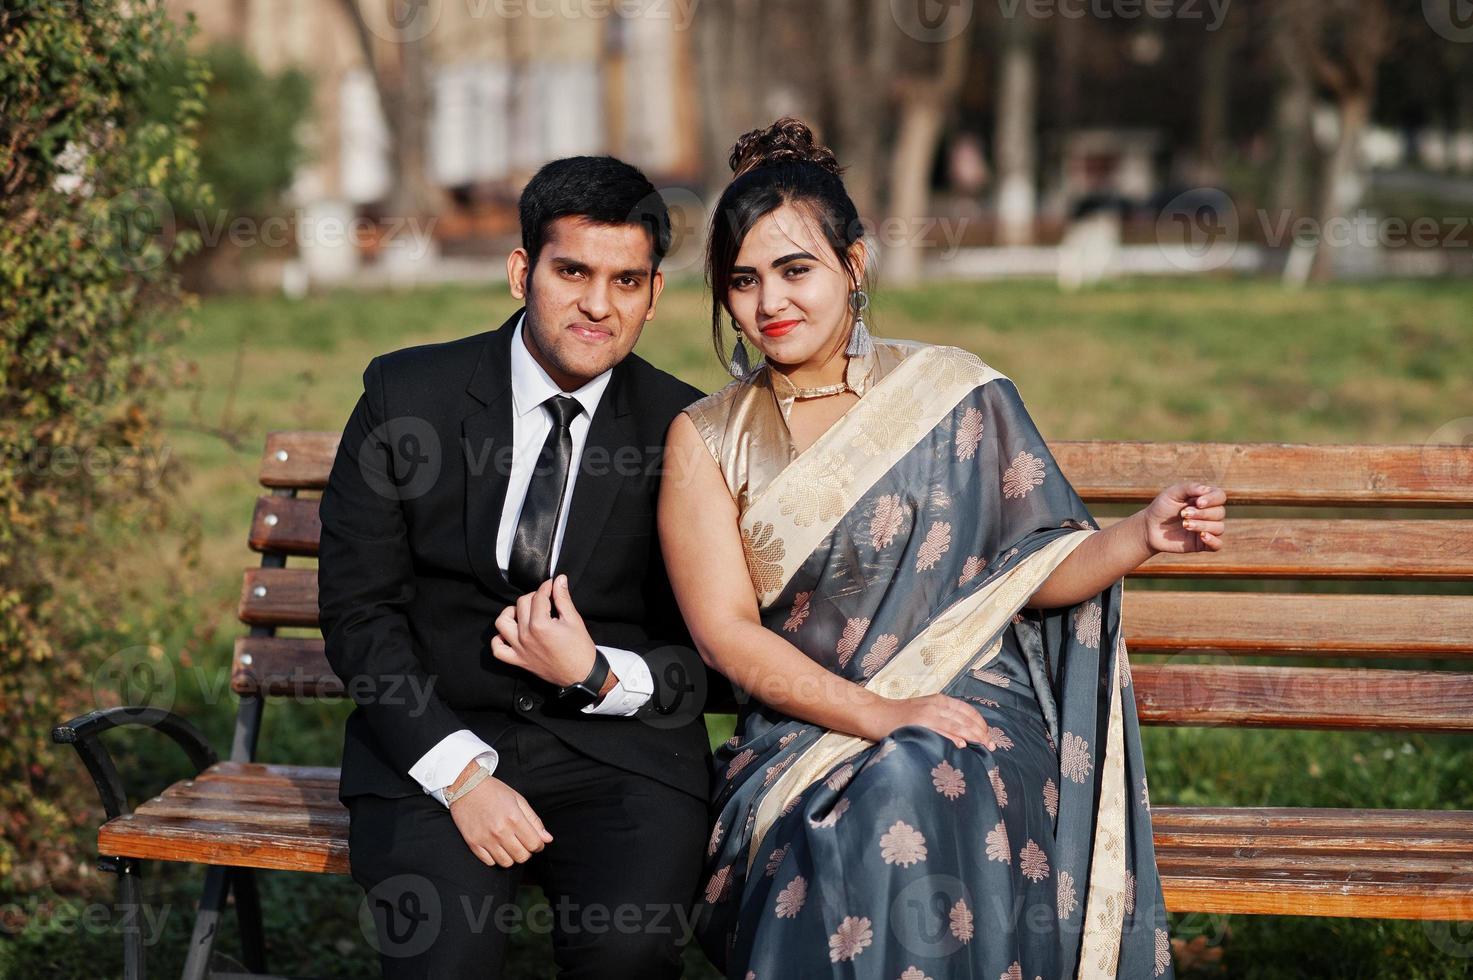 Elegant and fashionable indian friends couple of woman in saree and man in suit sitting on bench. photo